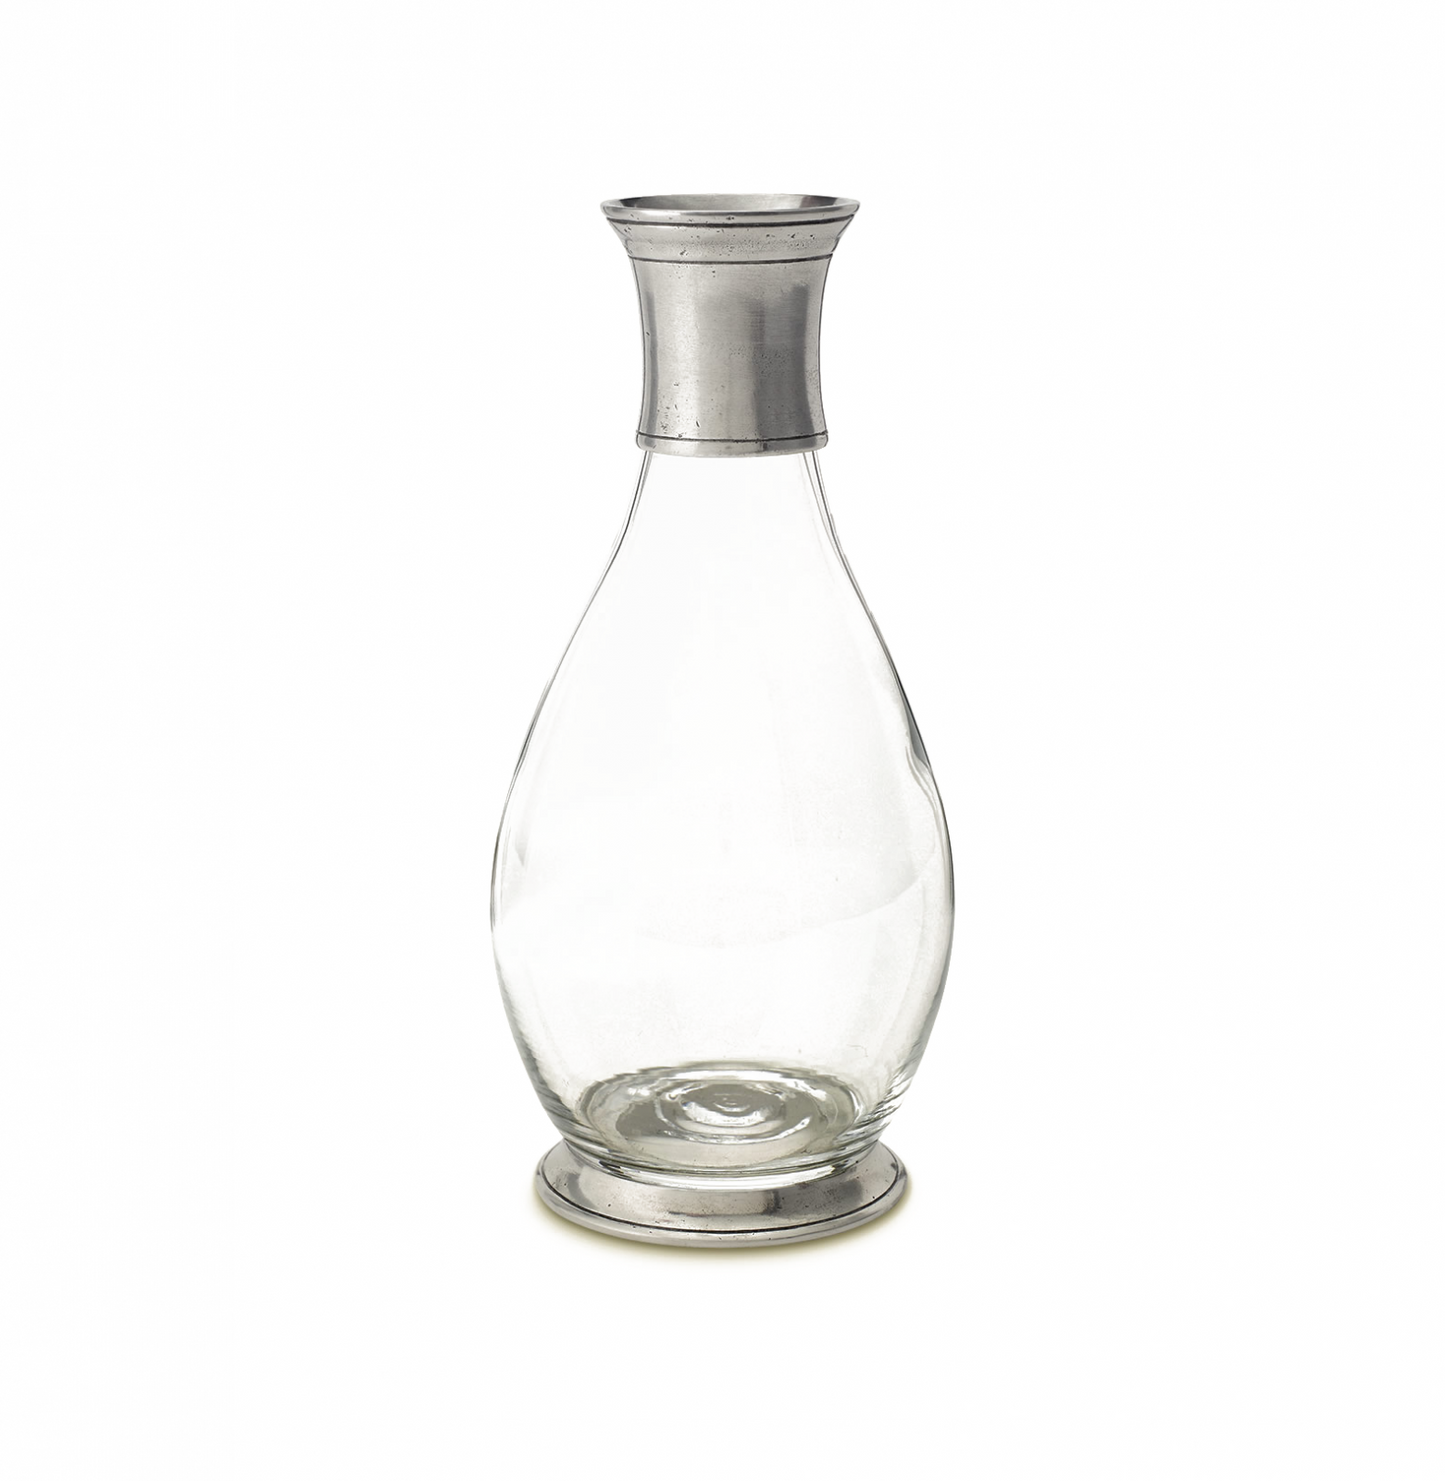 Match Pewter Tall Carafe with Collar